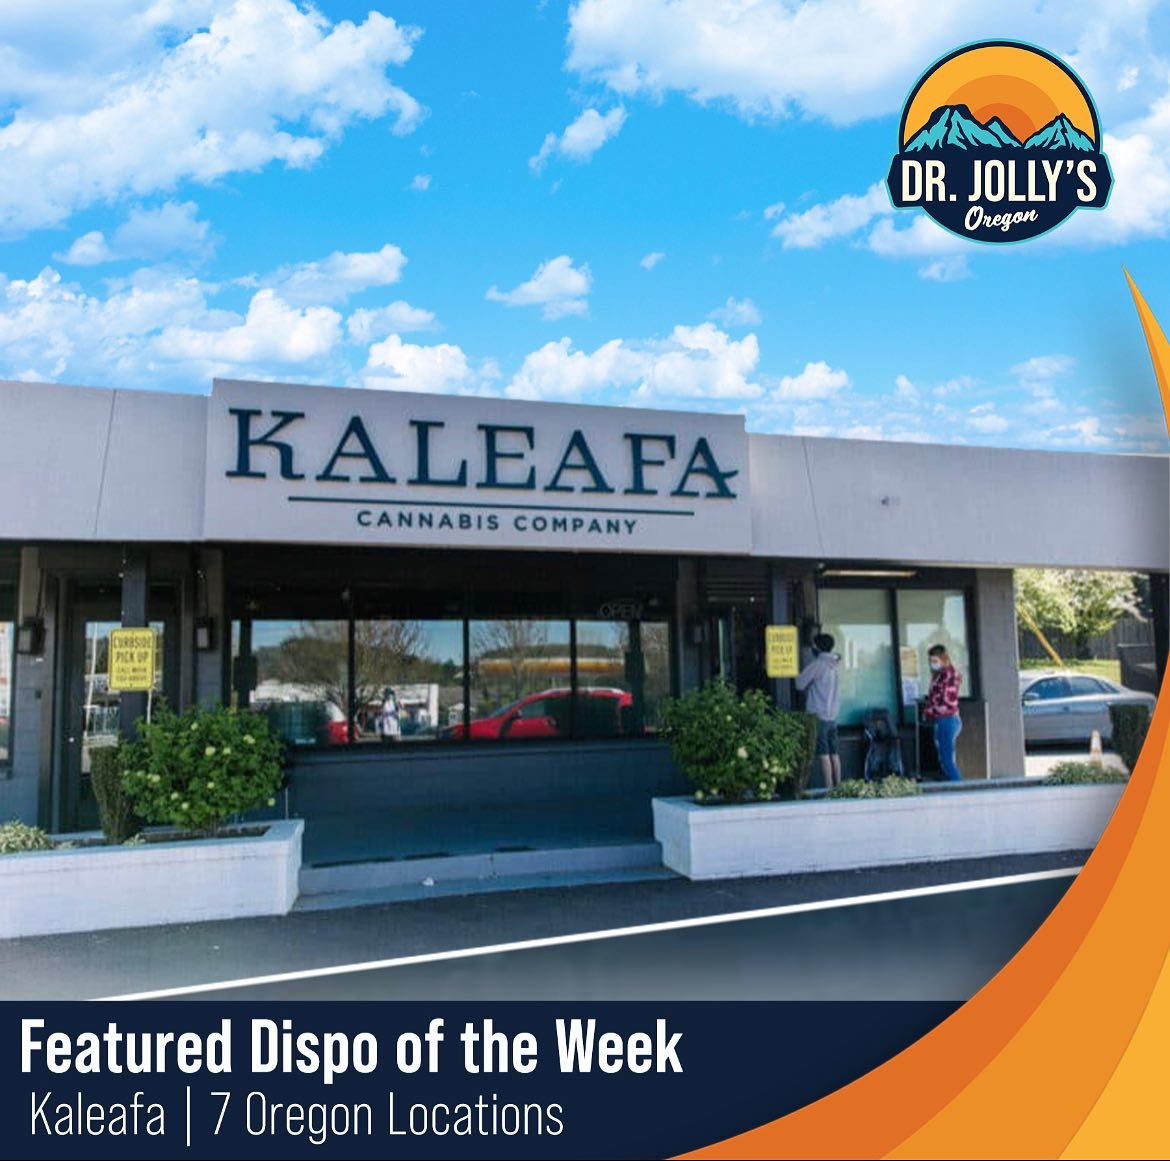 FEATURED DISPO of the WEEK: @kaleafaco 
.
We are proud to work with such a great company as Kaleafa! Their team is polished! Merchandising on point. And of course with a knowledgable and Friendly staff, 7+ locations in Oregon, and products that excit